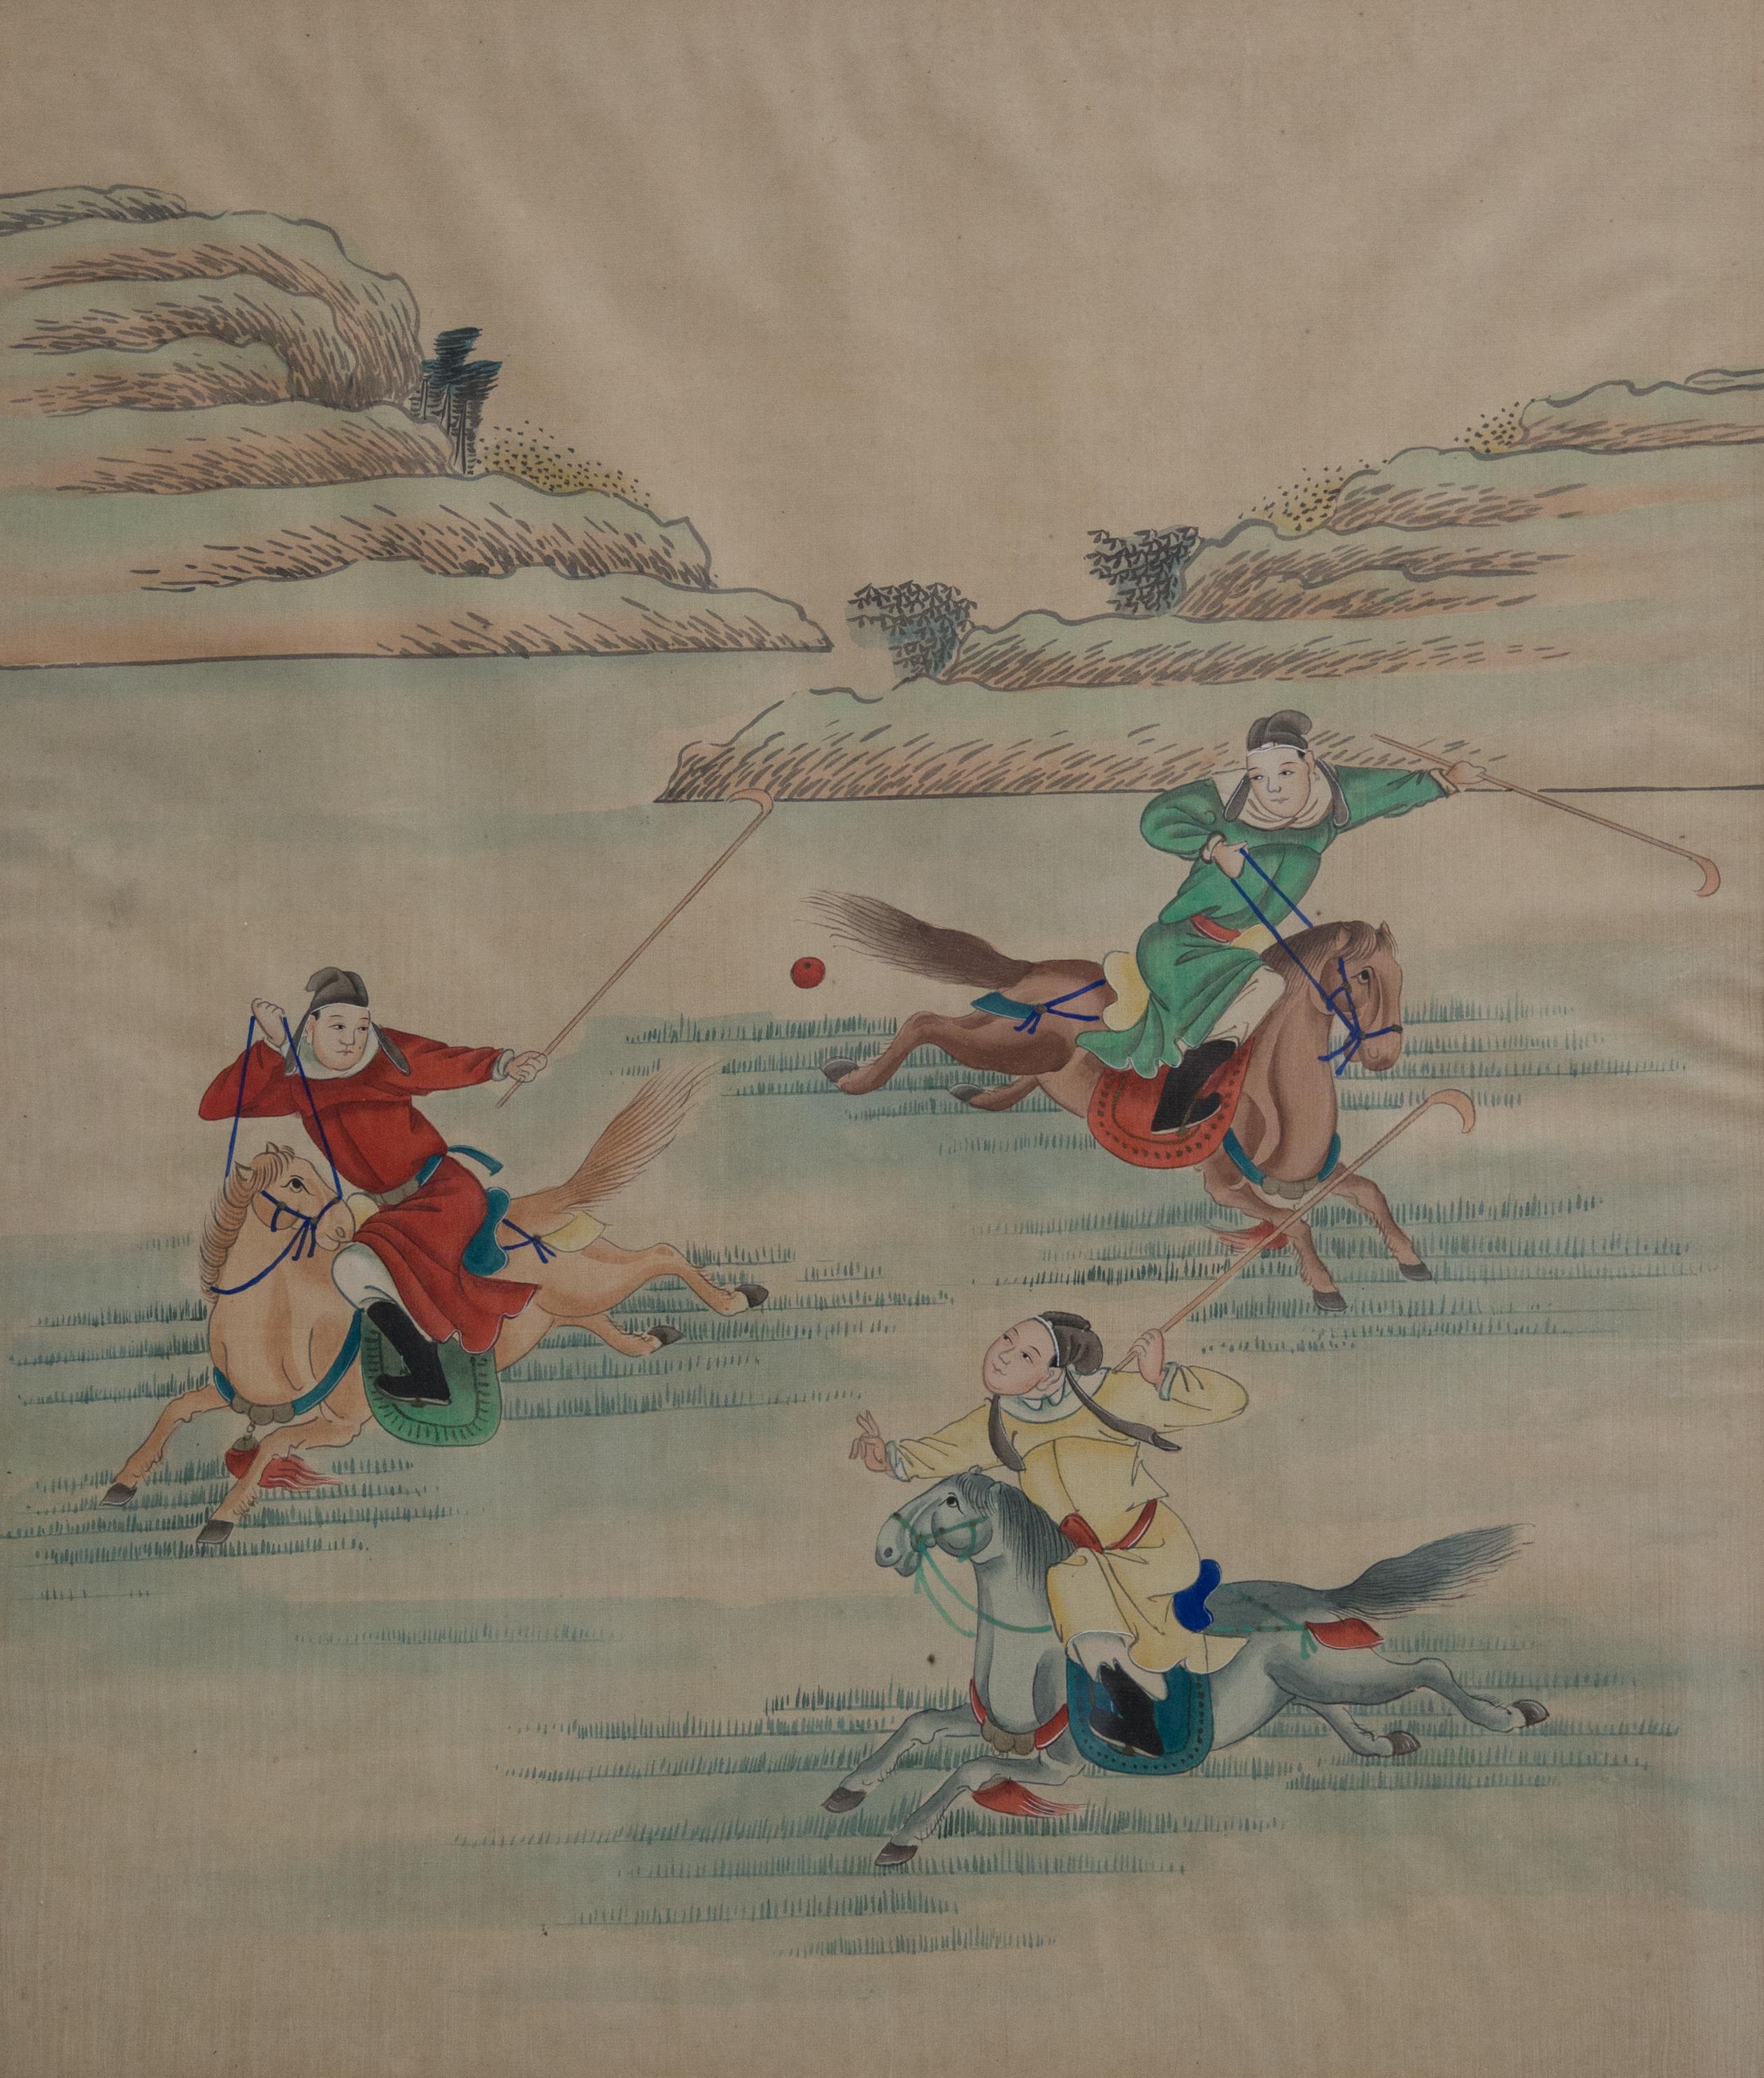 Offered is a large 19th century gouache painting on fabric of Chinese horsemen competing at polo. Polo likely travelled via the Silk Road to China from Persia where it was popular in the Chinese Tang dynasty capital of Chang'an, and also played by